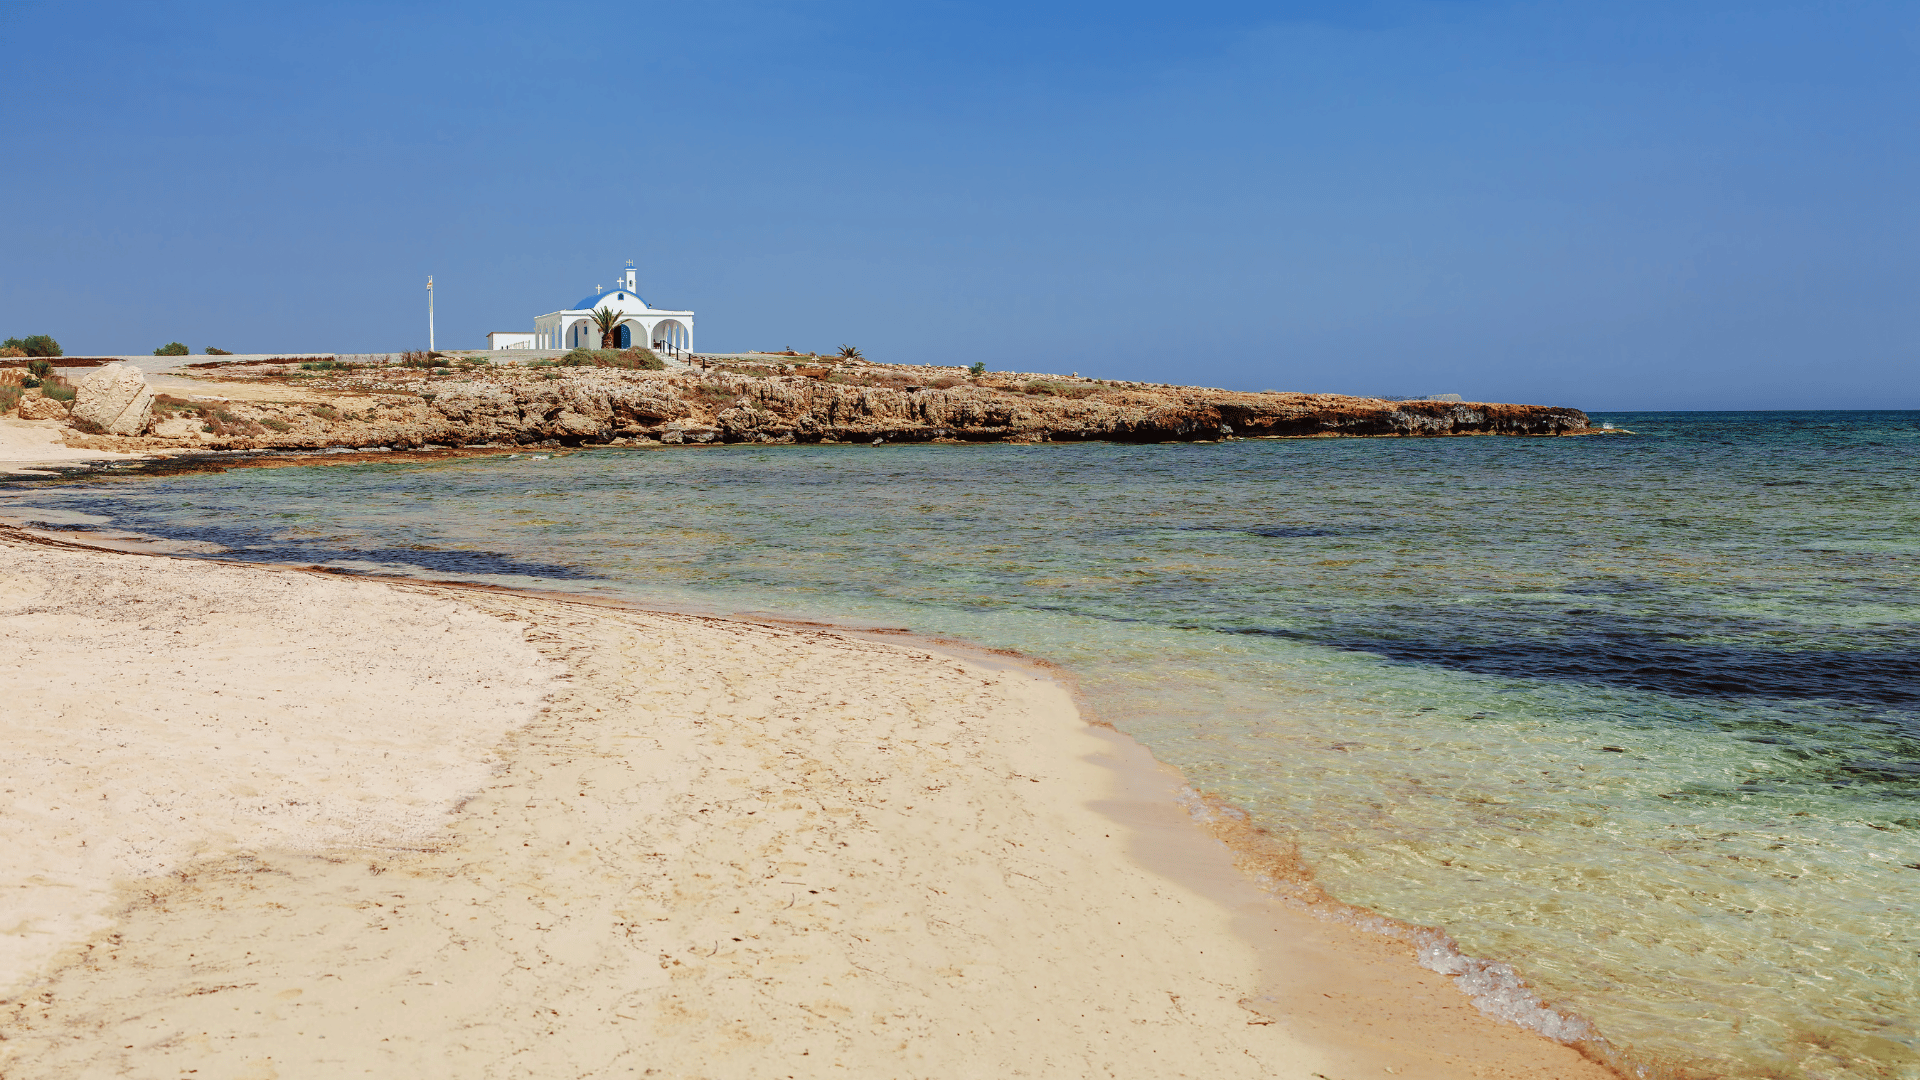 A photo of the beach, with sand and the sea. In the background is a building.